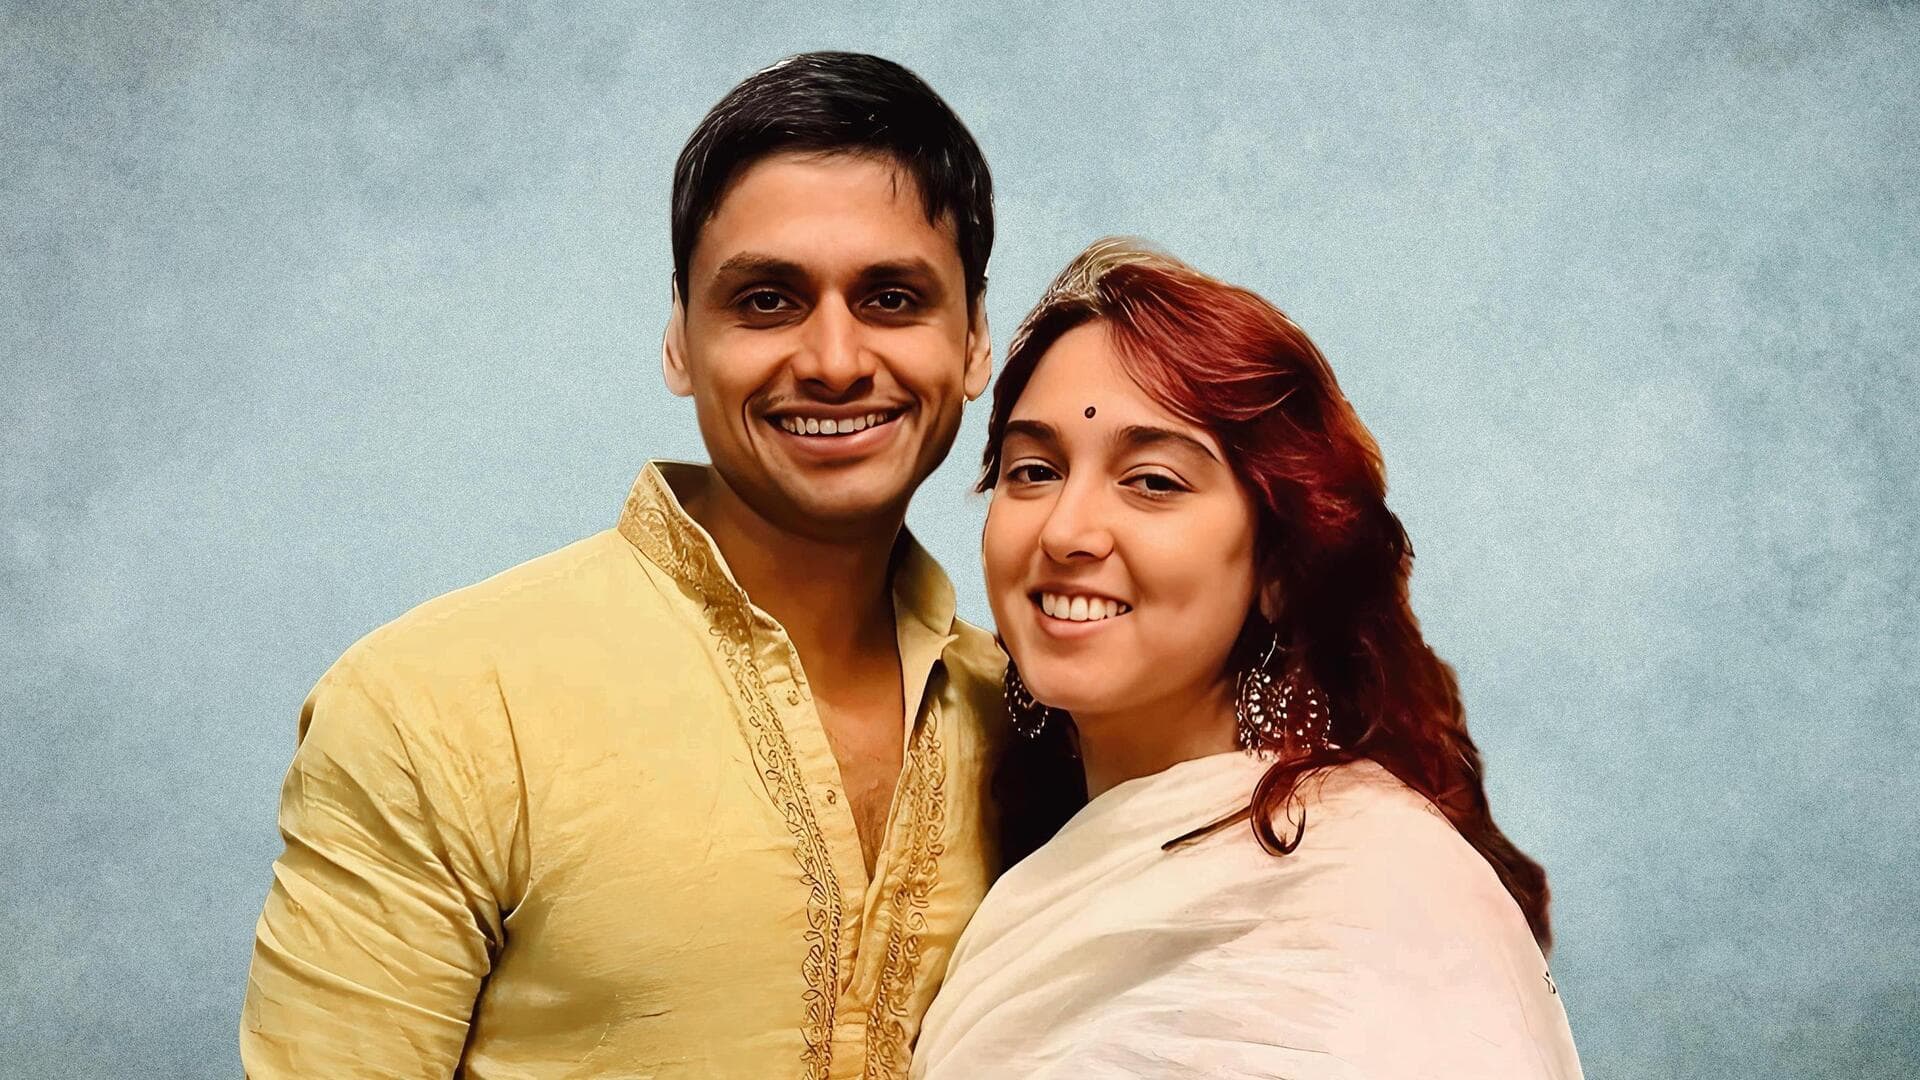 Friends to fiancés: Ira Khan-Nupur Shikhare's journey in a nutshell